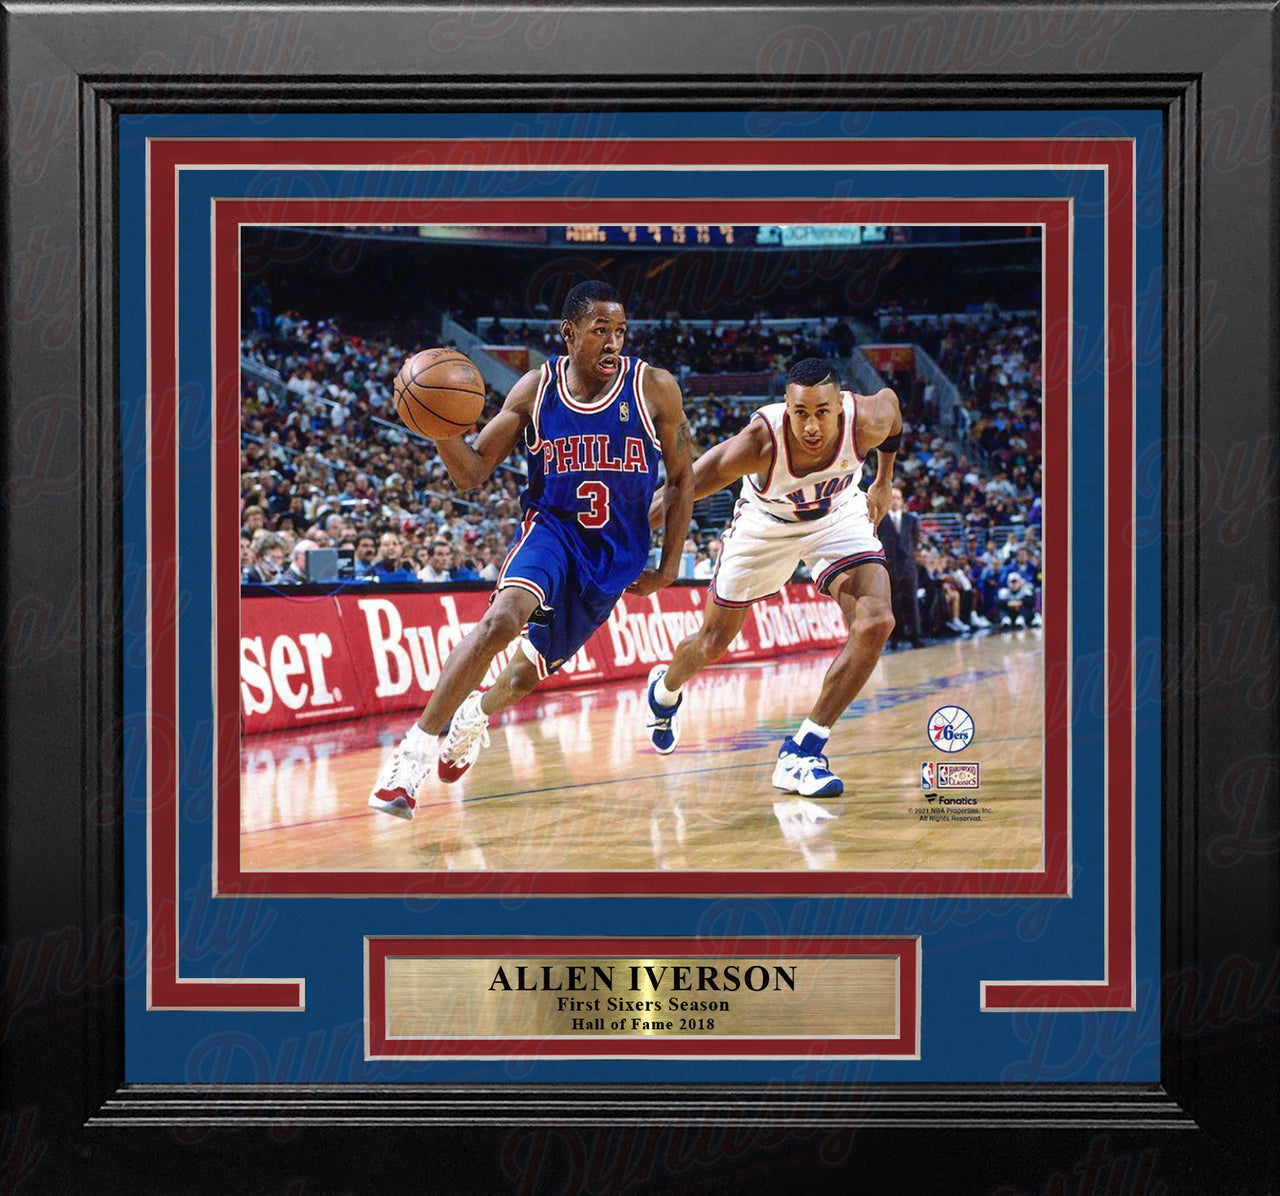 Tyrese Maxey in Action Philadelphia 76ers 8 x 10 Framed Basketball Photo  with Engraved Autograph - Dynasty Sports & Framing